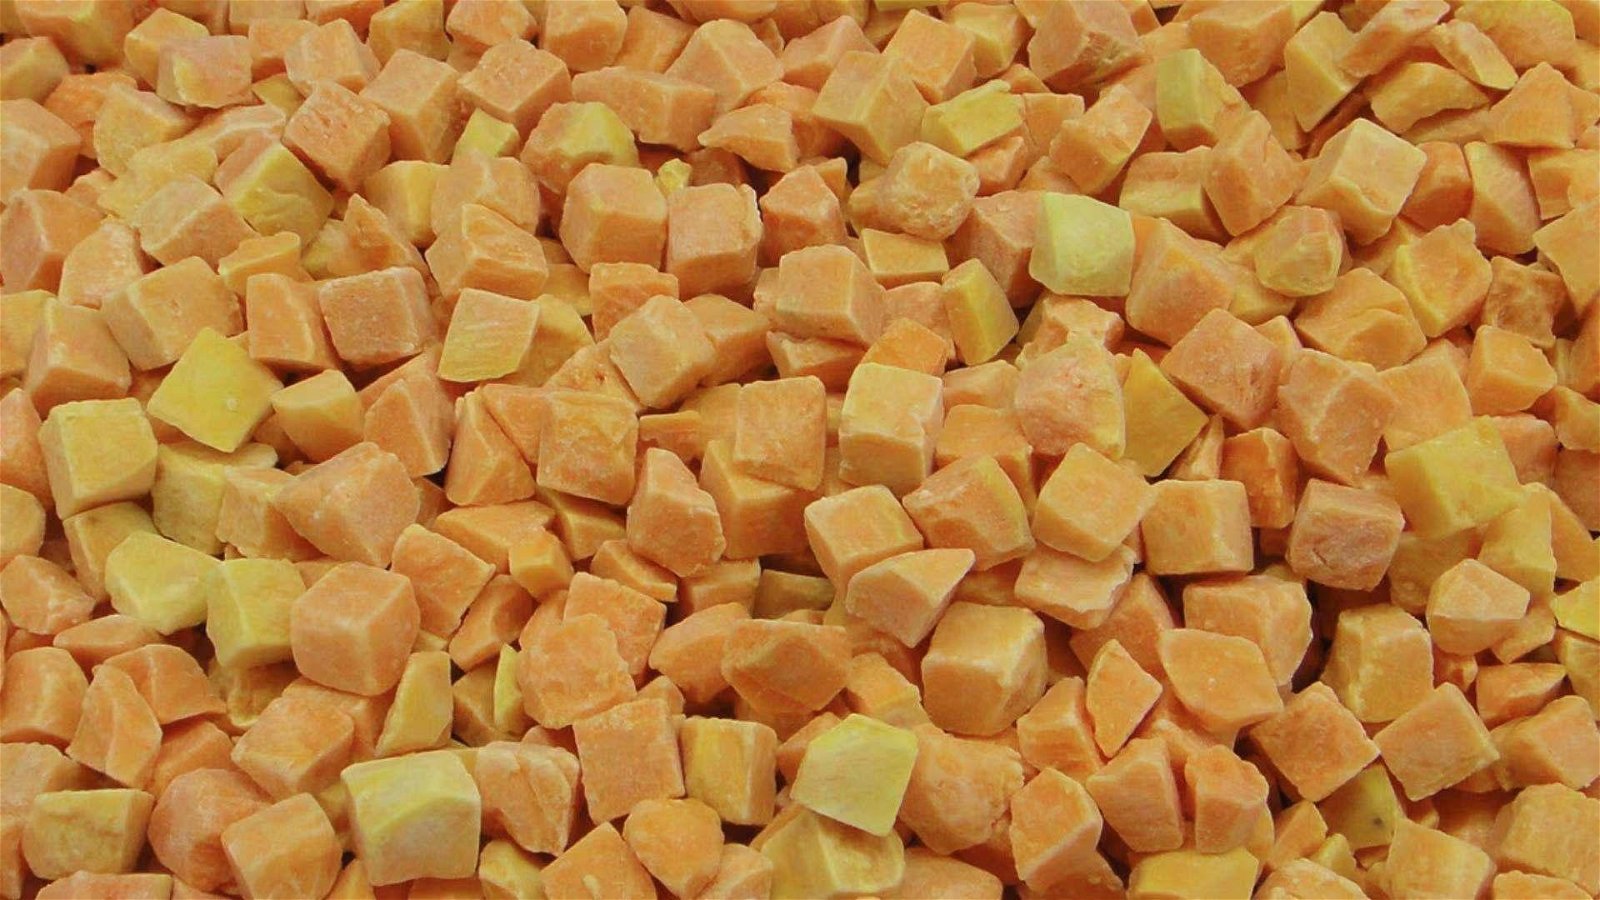 IQF Sweet Potato Dices,Frozen Sweet Potato Dices,steamed/blanched